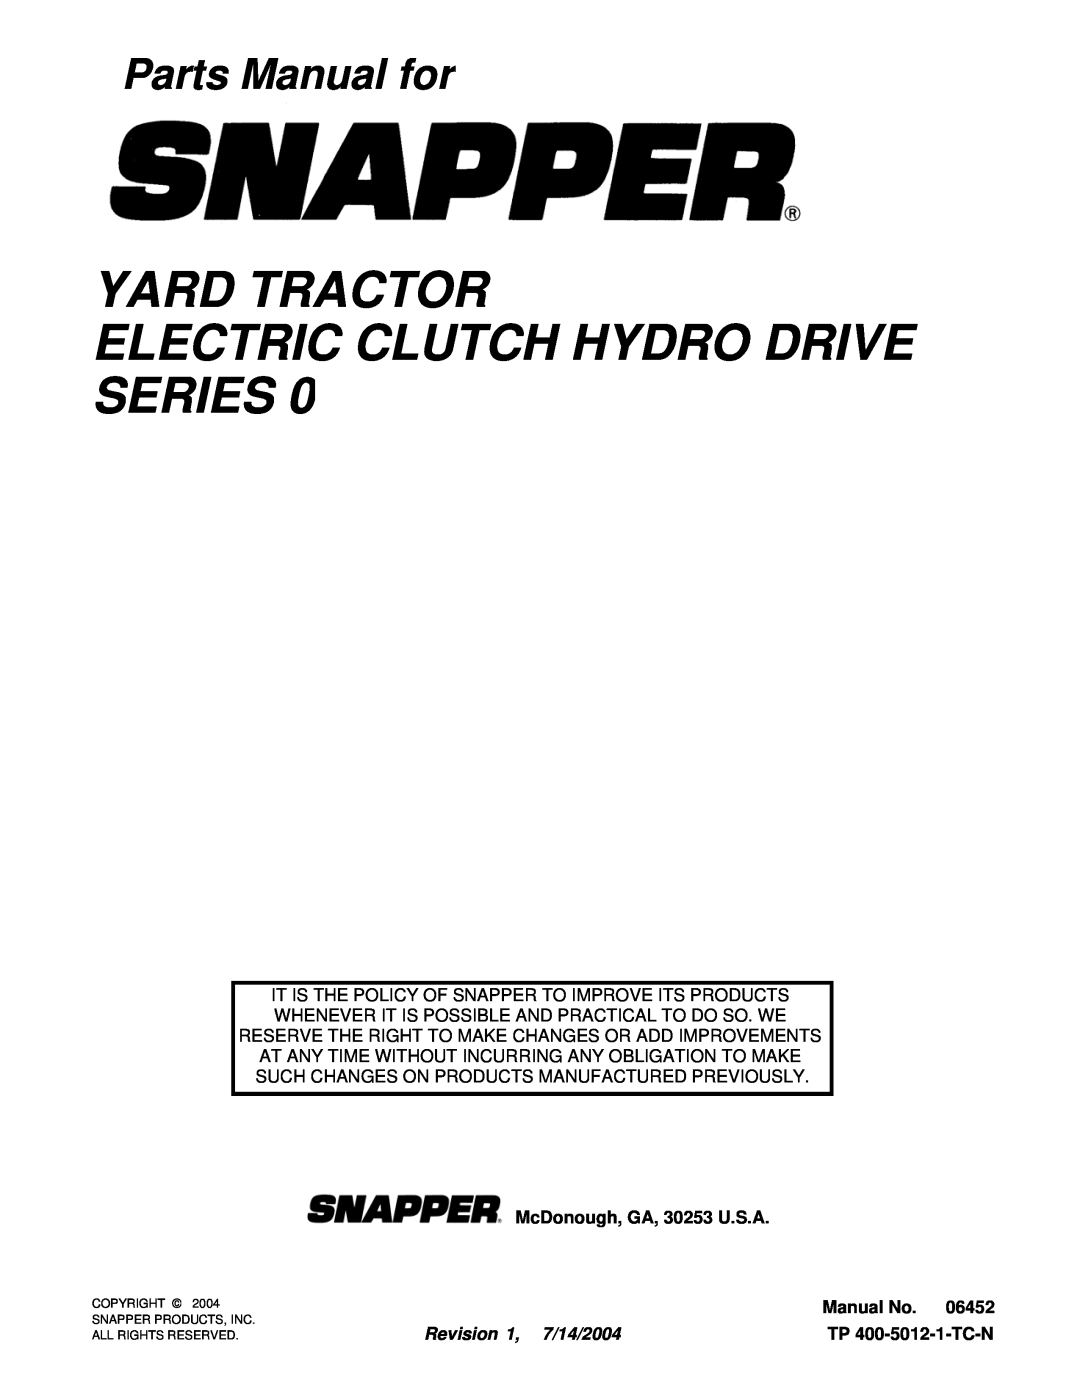 Snapper YT1644, YT1844, YT1844, YT1850, YT2050 manual Yard Tractor Electric Clutch Hydro Drive Series, Parts Manual for 